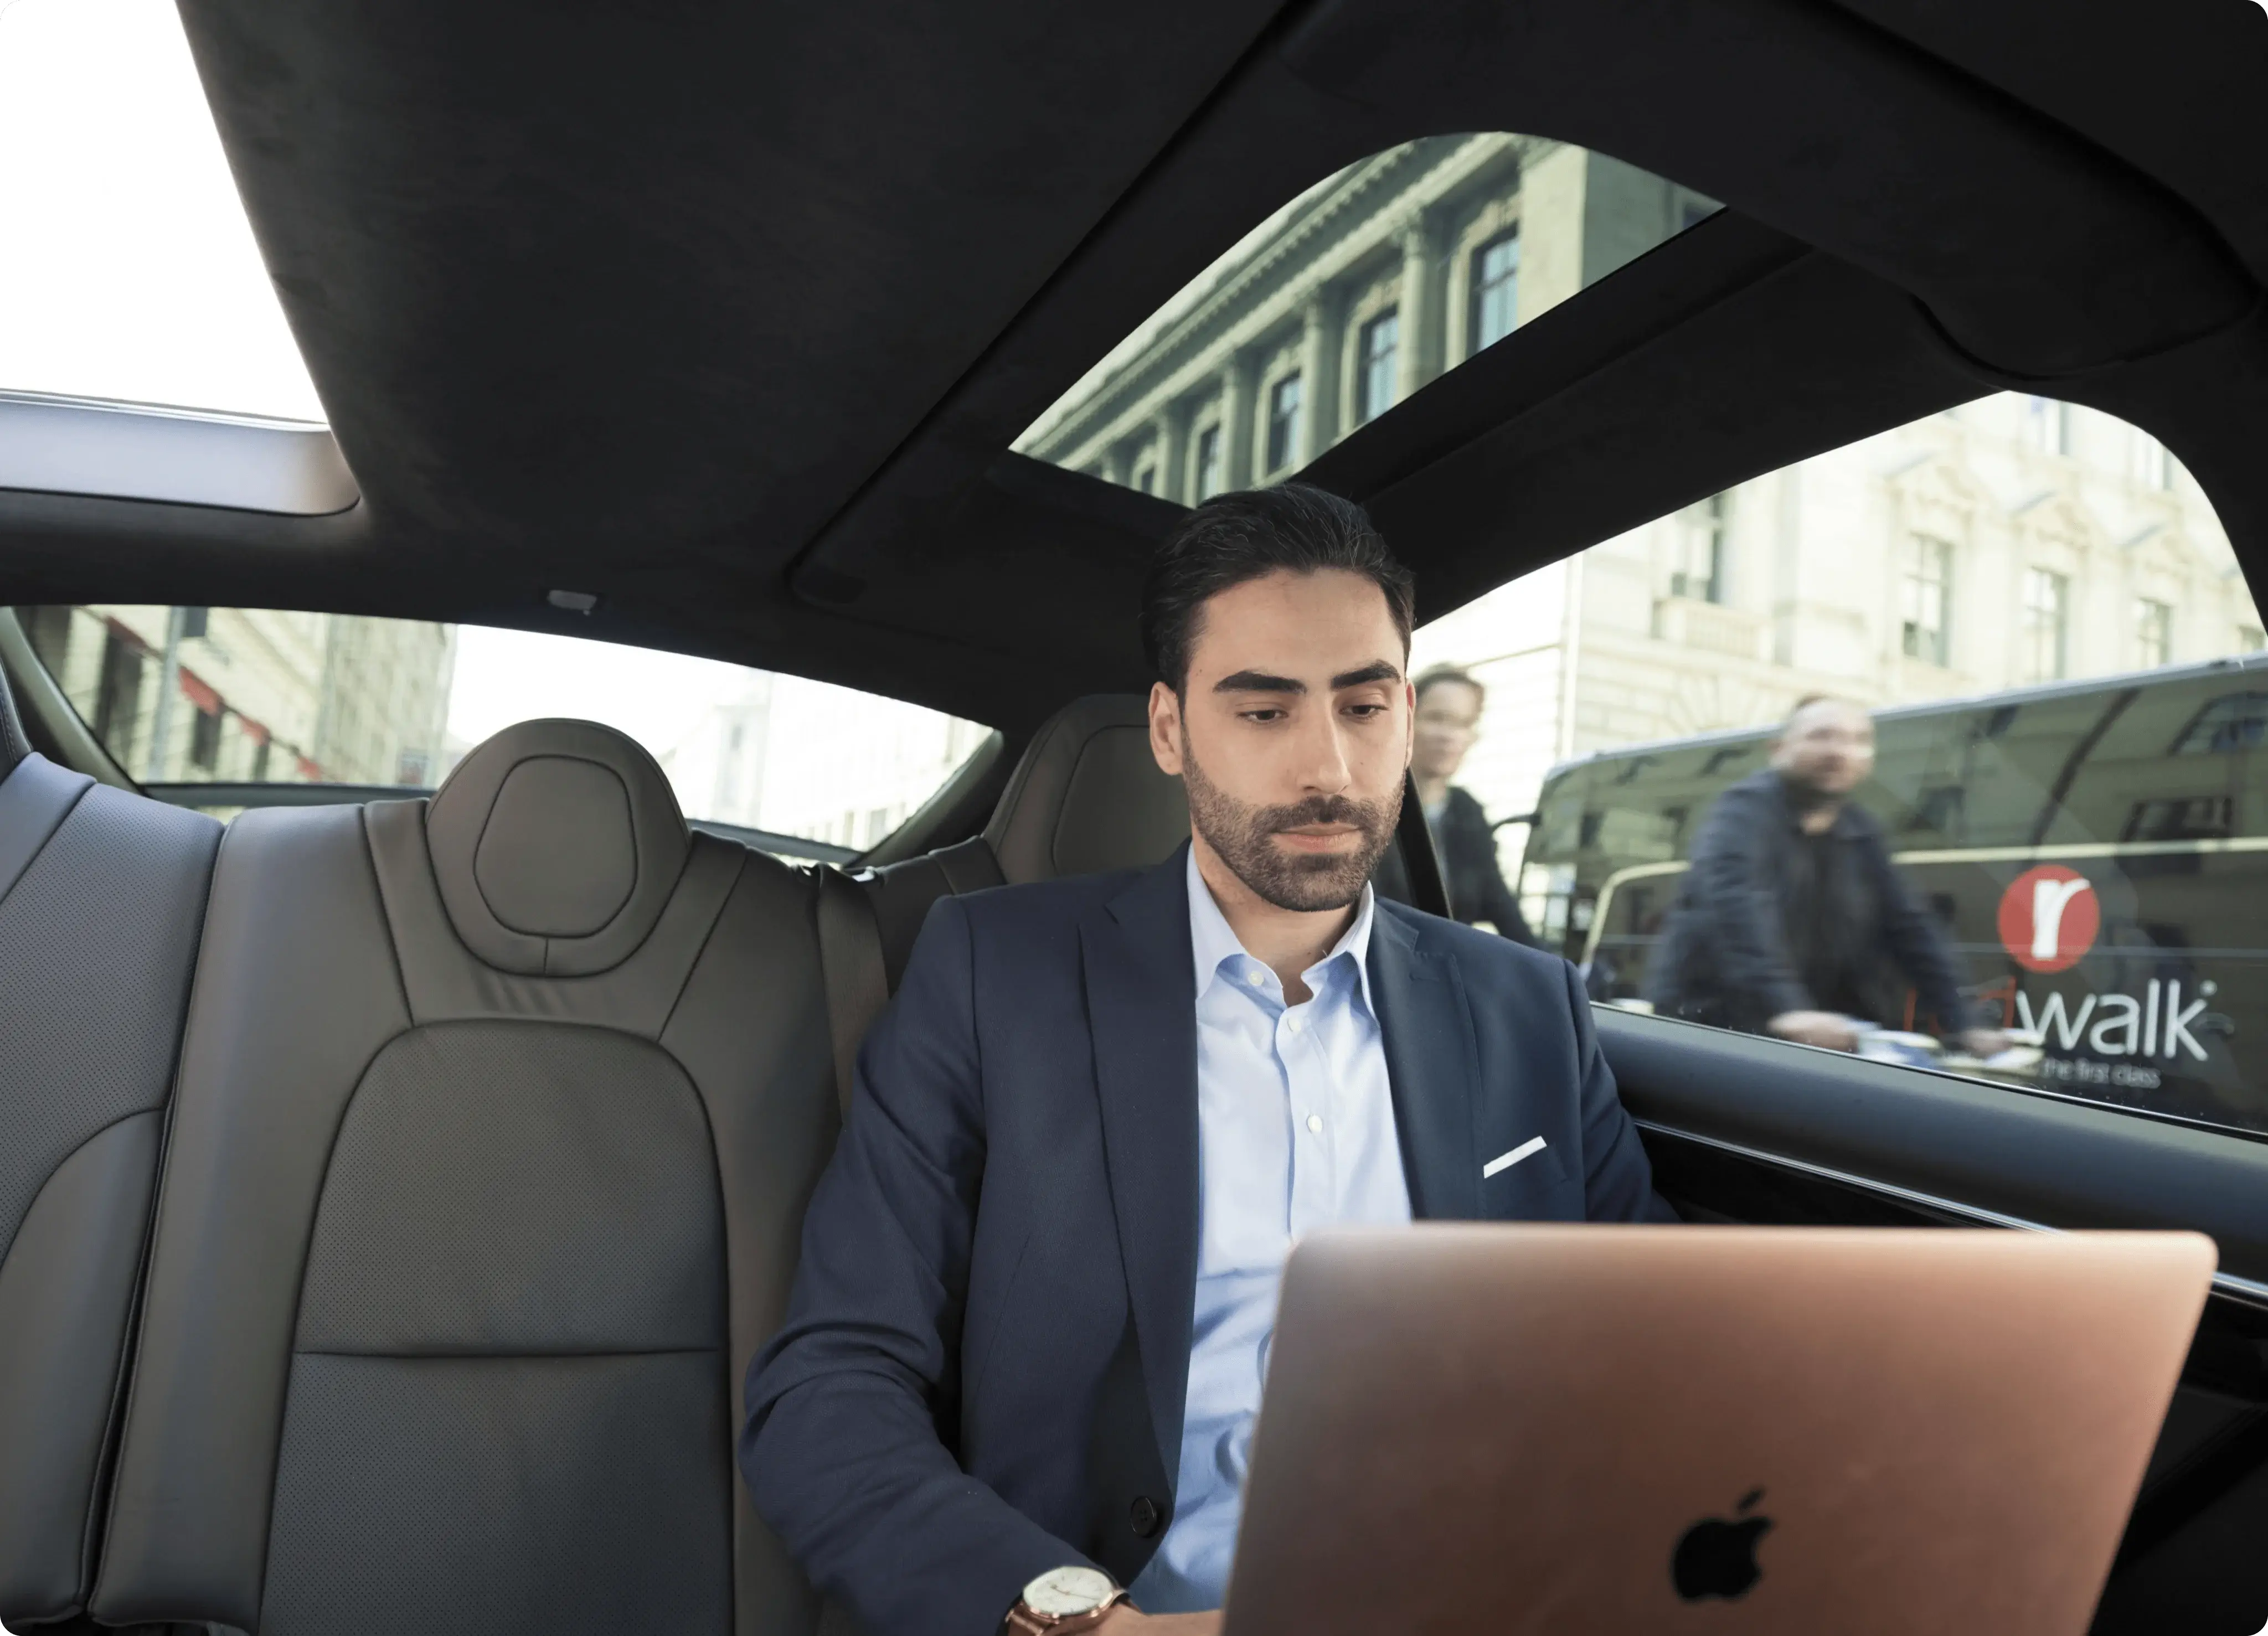 Upgrading Travel with a Luxury Chauffeurservice Istanbul, Turkey